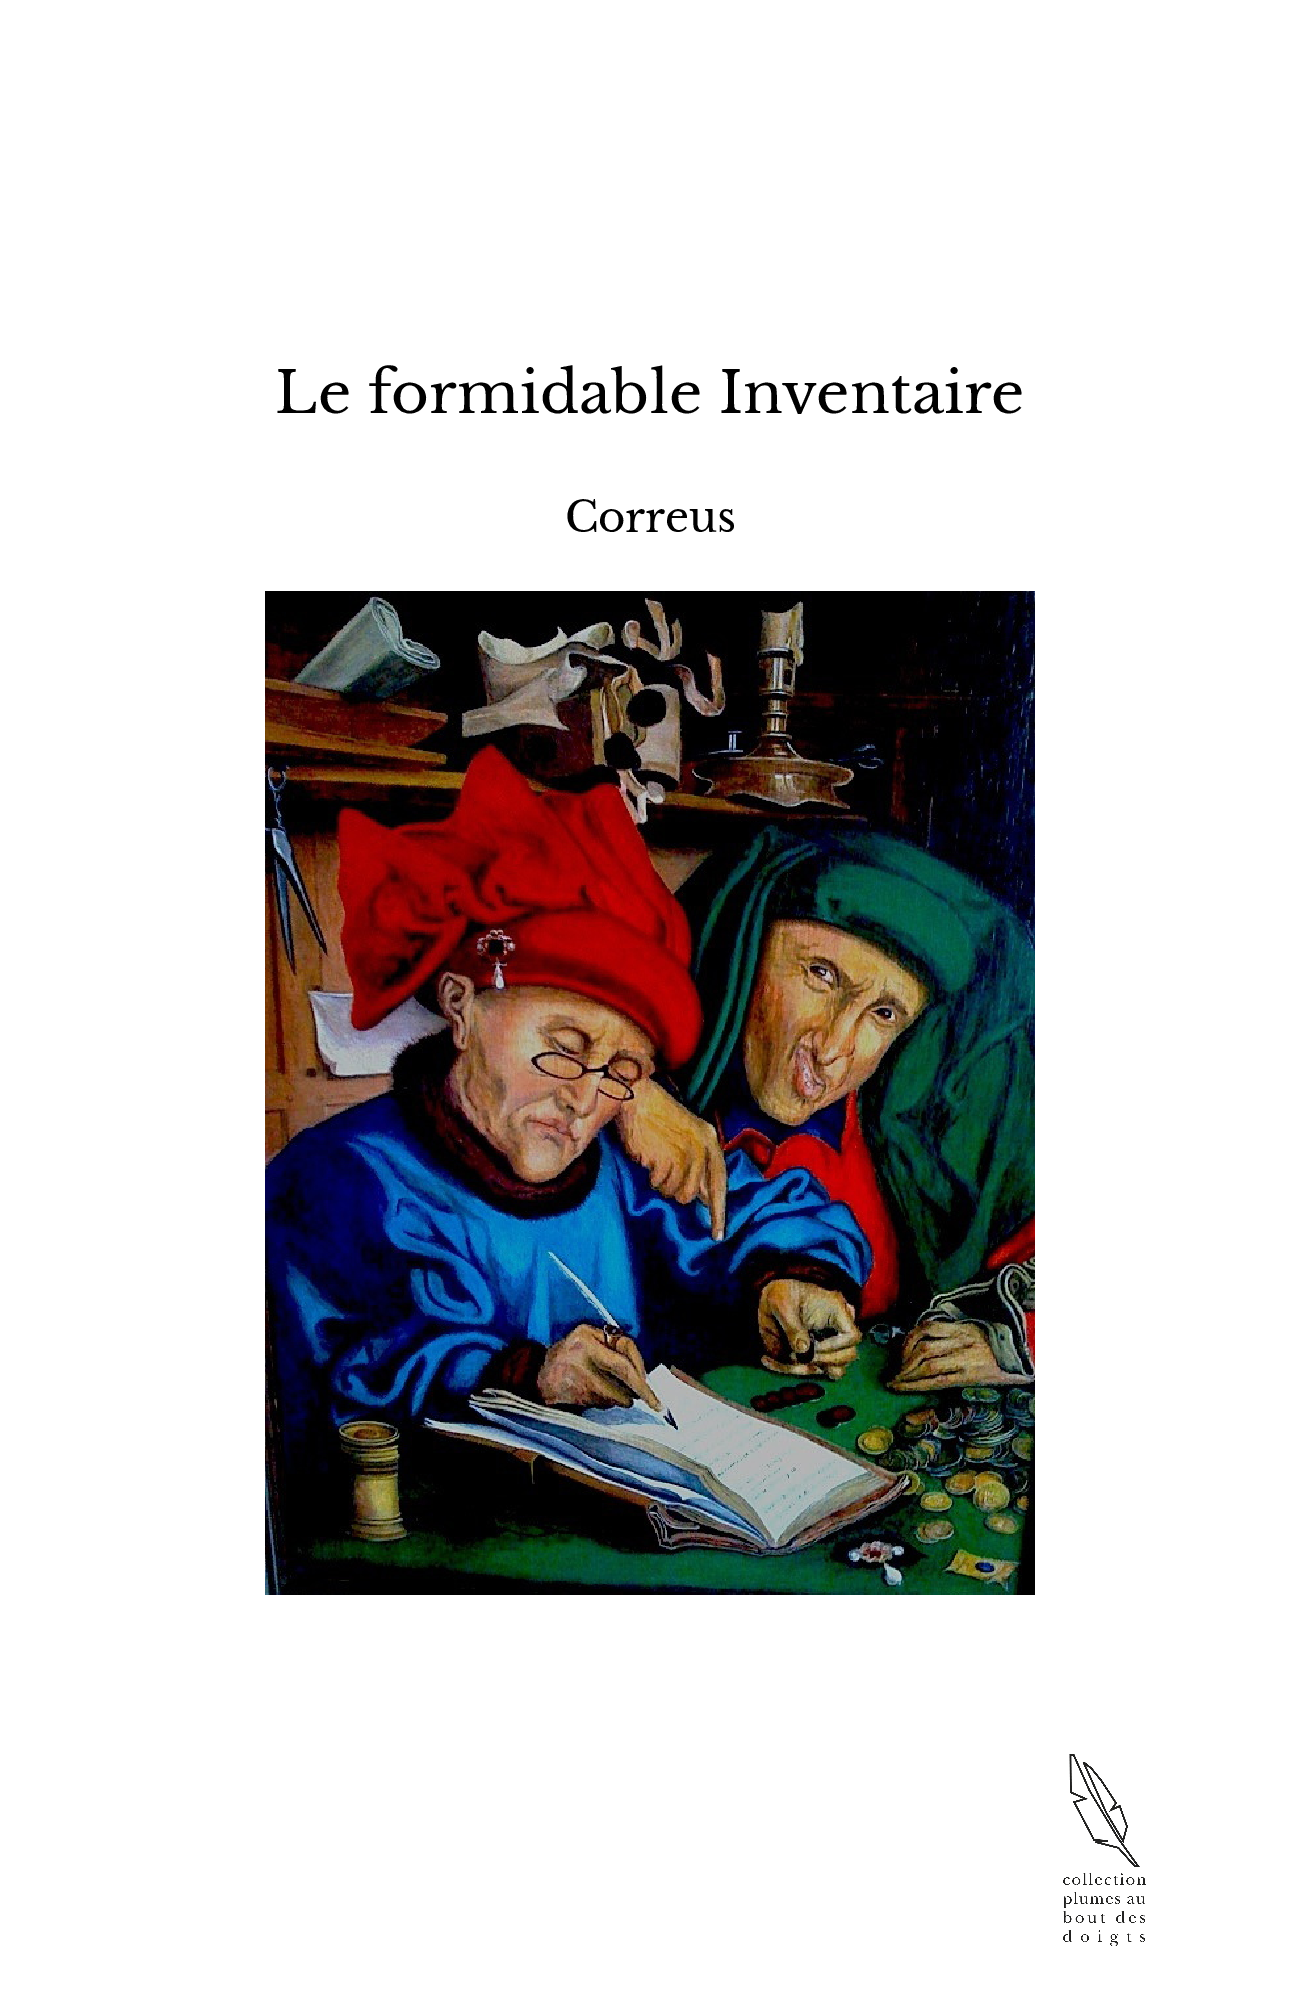 Le formidable Inventaire